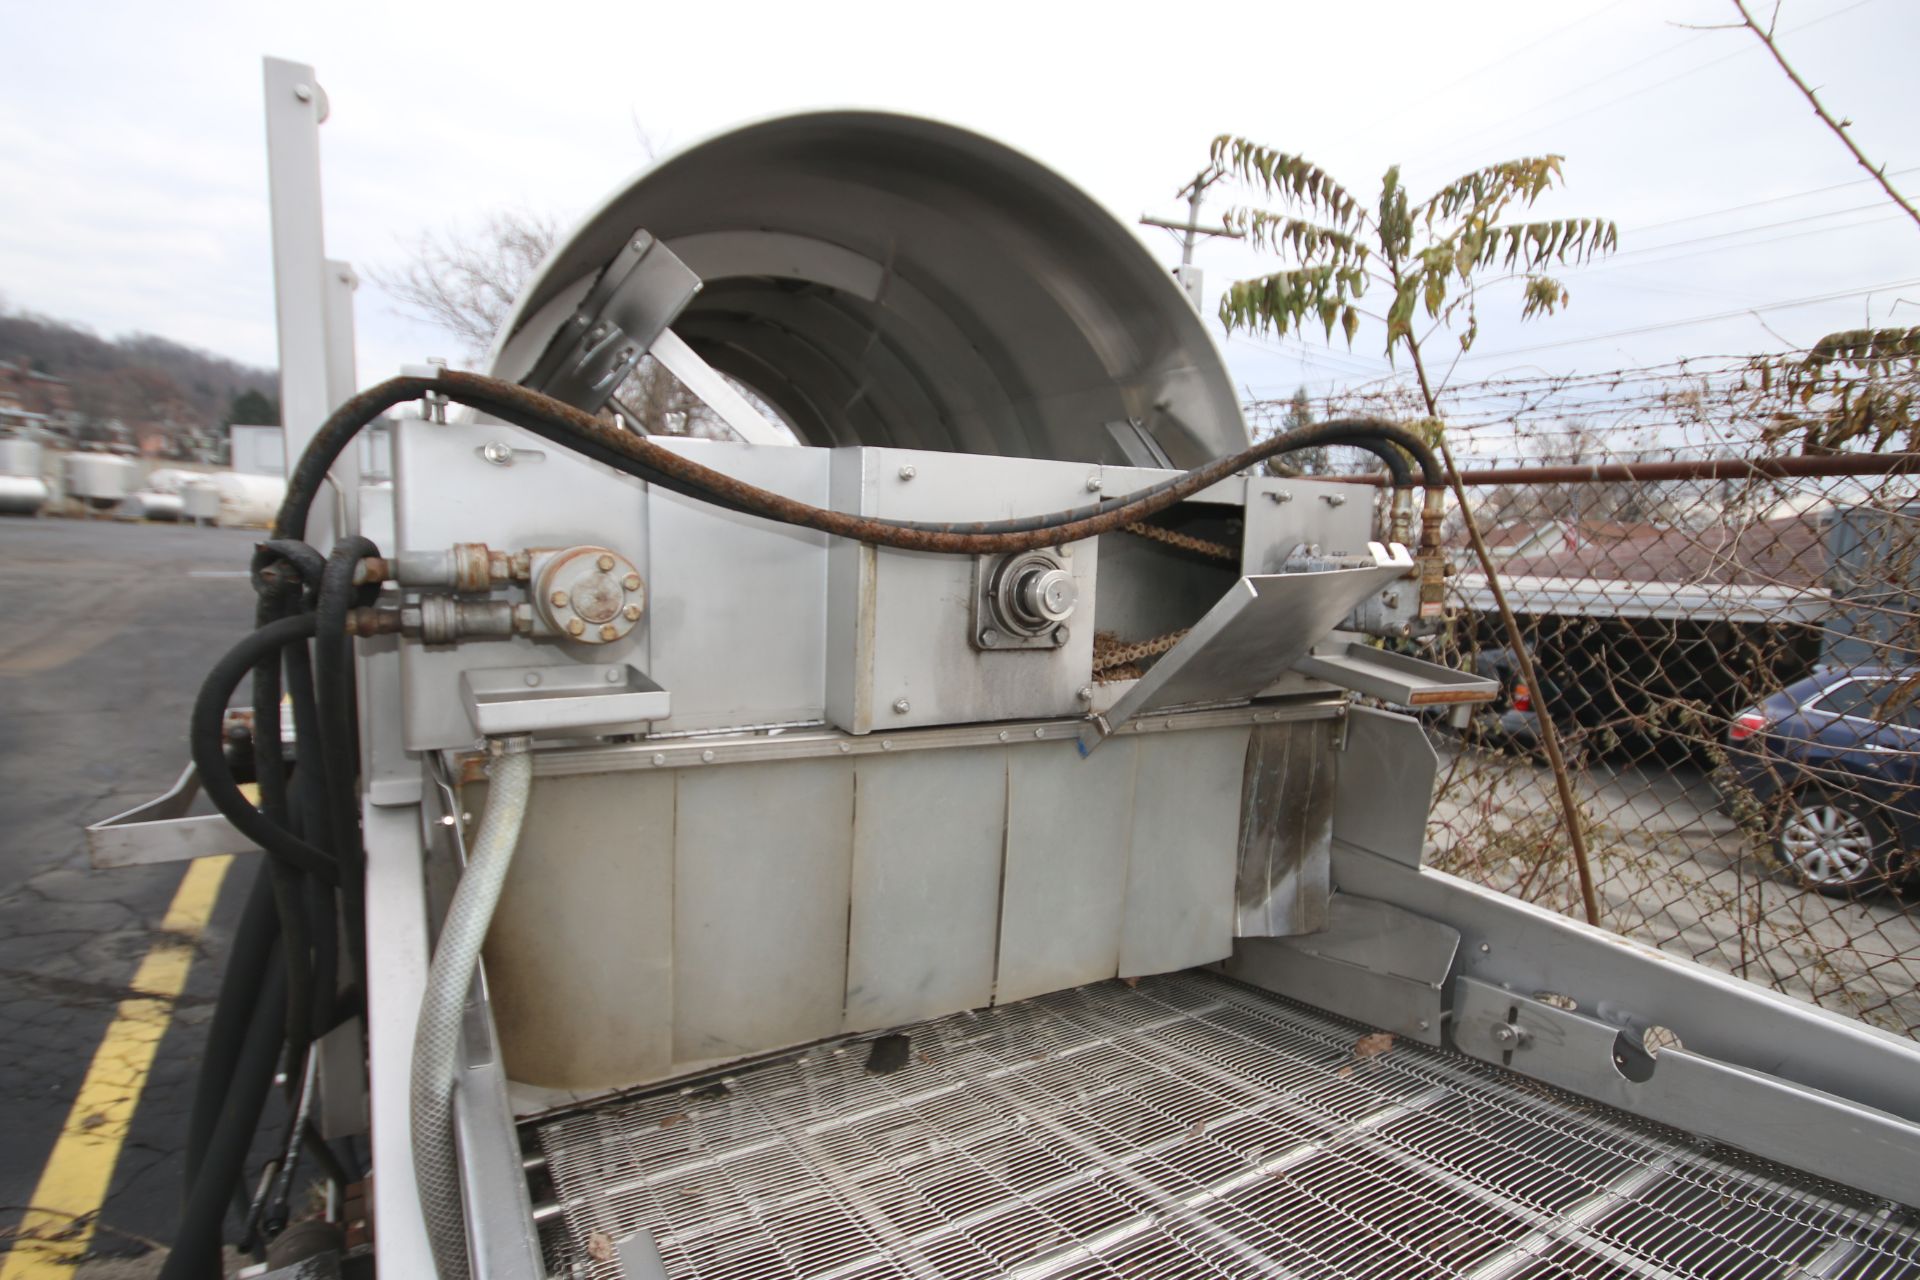 Nothum S/S Drum Breader, Model NRP-40, SN 40741098, with 46" W x 6 ft L Drum with Hydraulic Drives & - Image 8 of 13